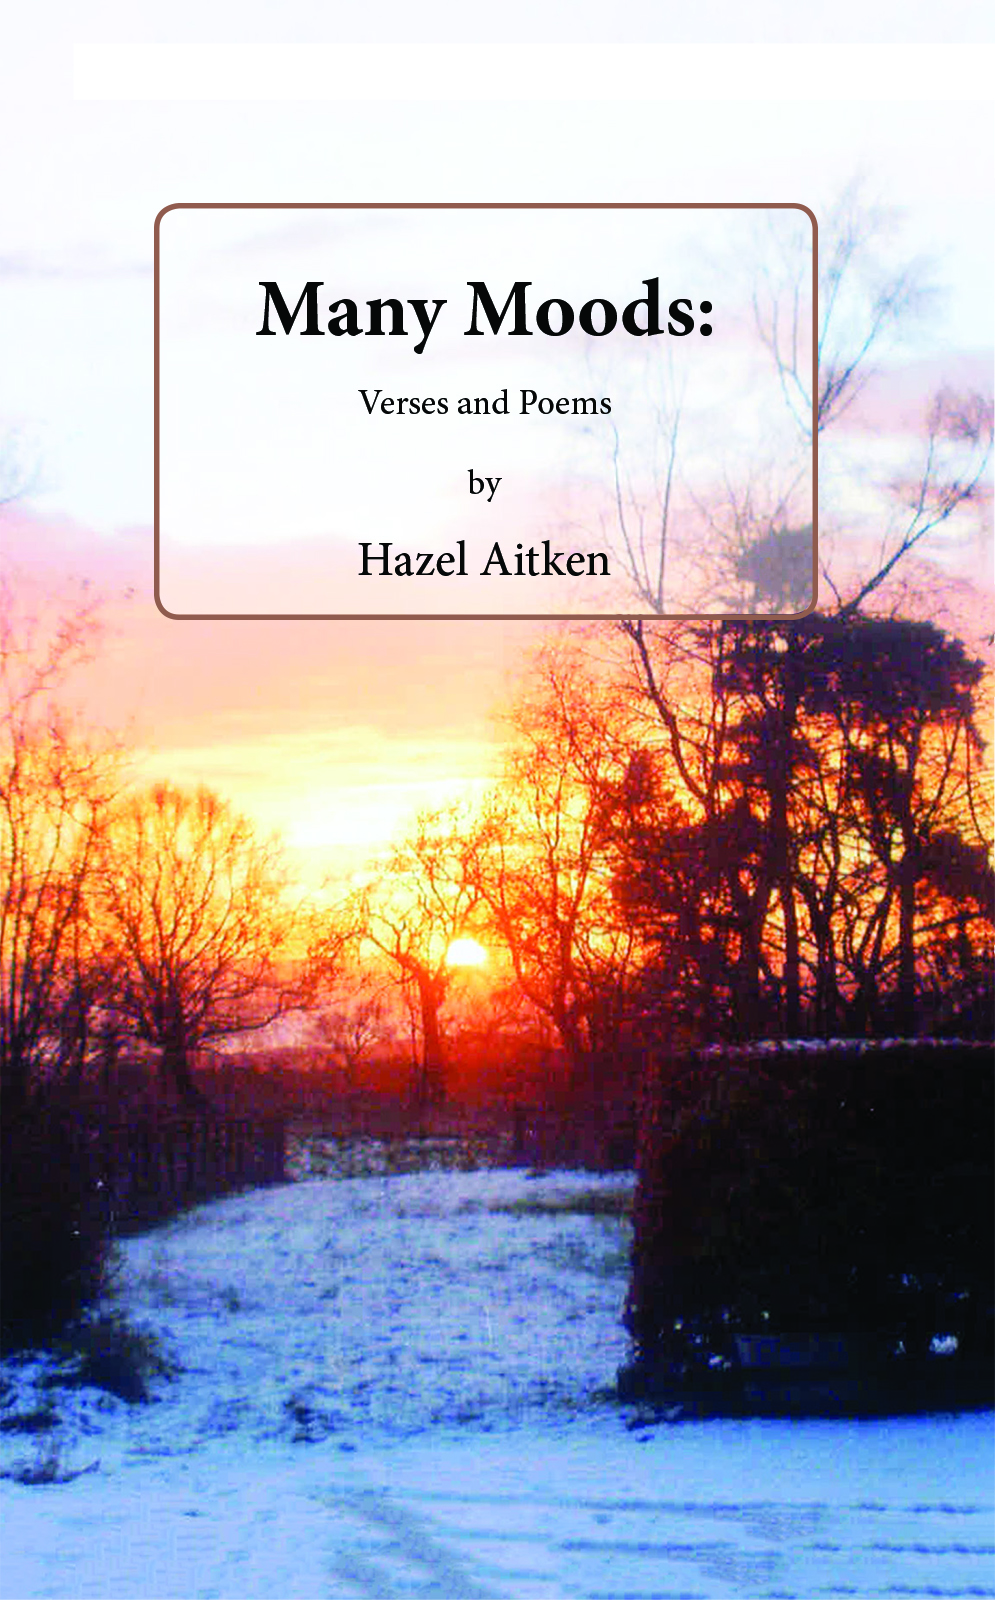 This image is the cover for the book Many Moods, Verses and Poems